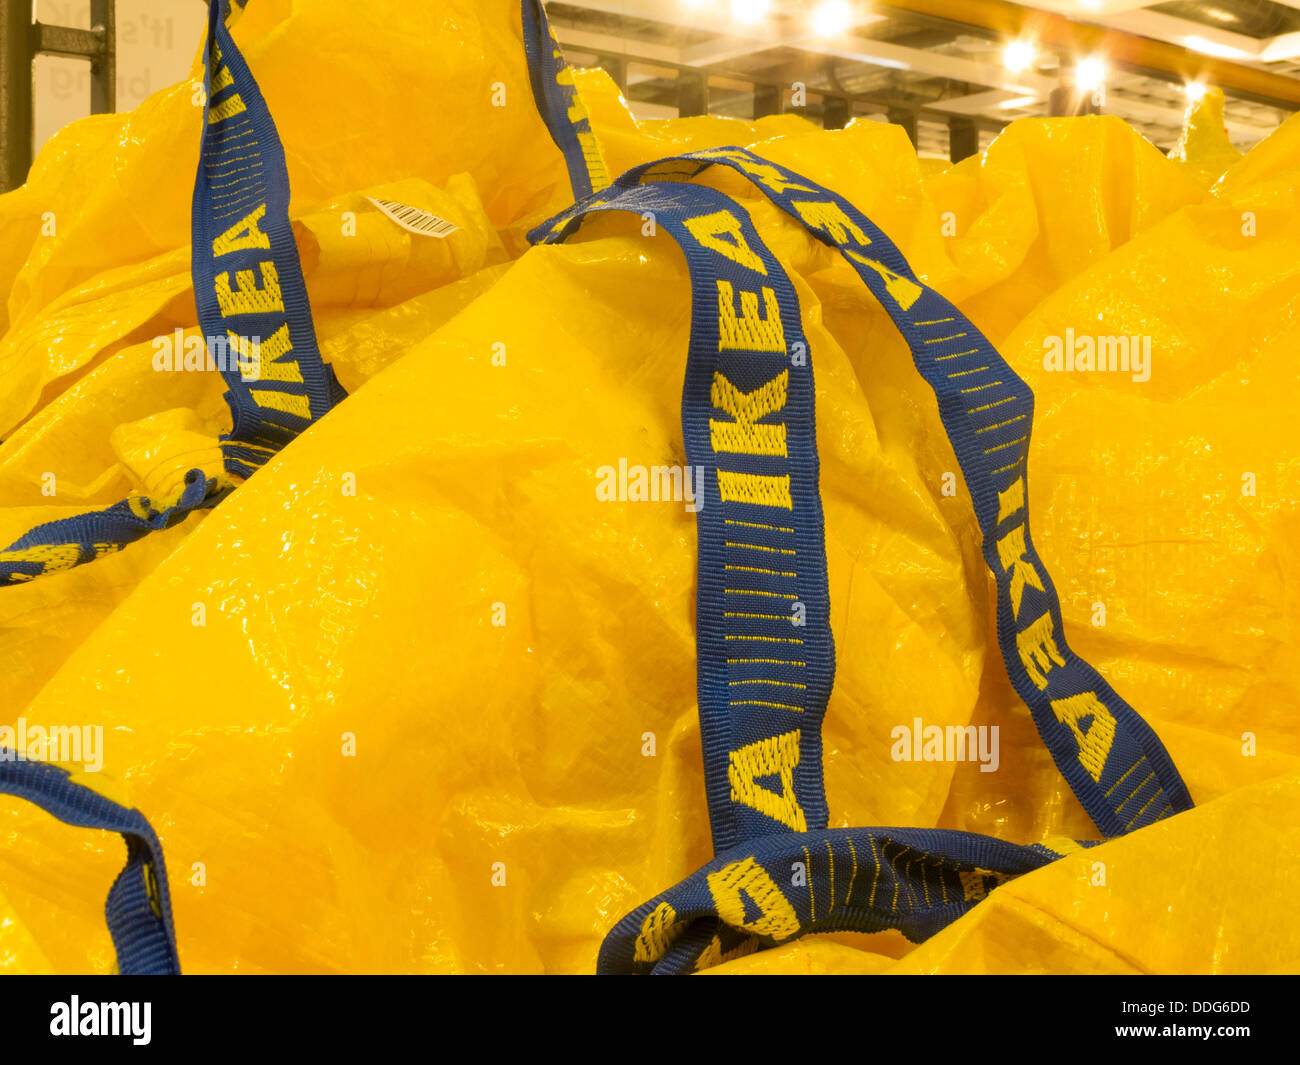 Bright Yellow and Blue Reuseable Shopping bags, IKEA Swedish Retail Stock Photo - Alamy